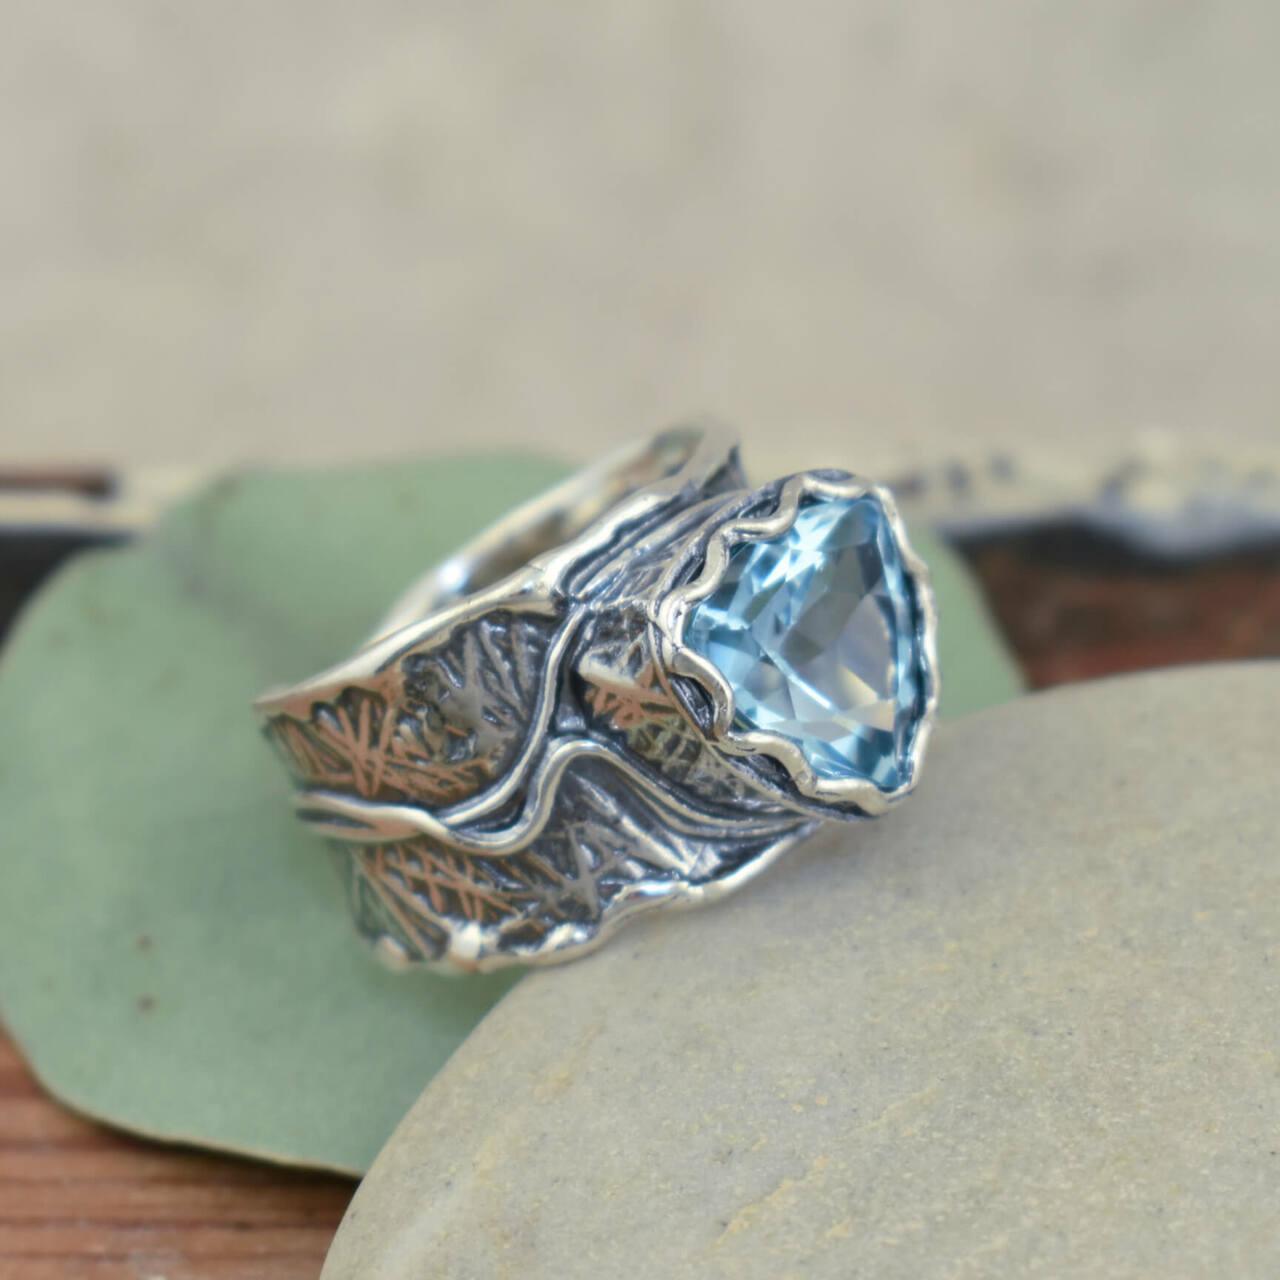 Handcrafted sterling silver ring featuring blue topaz